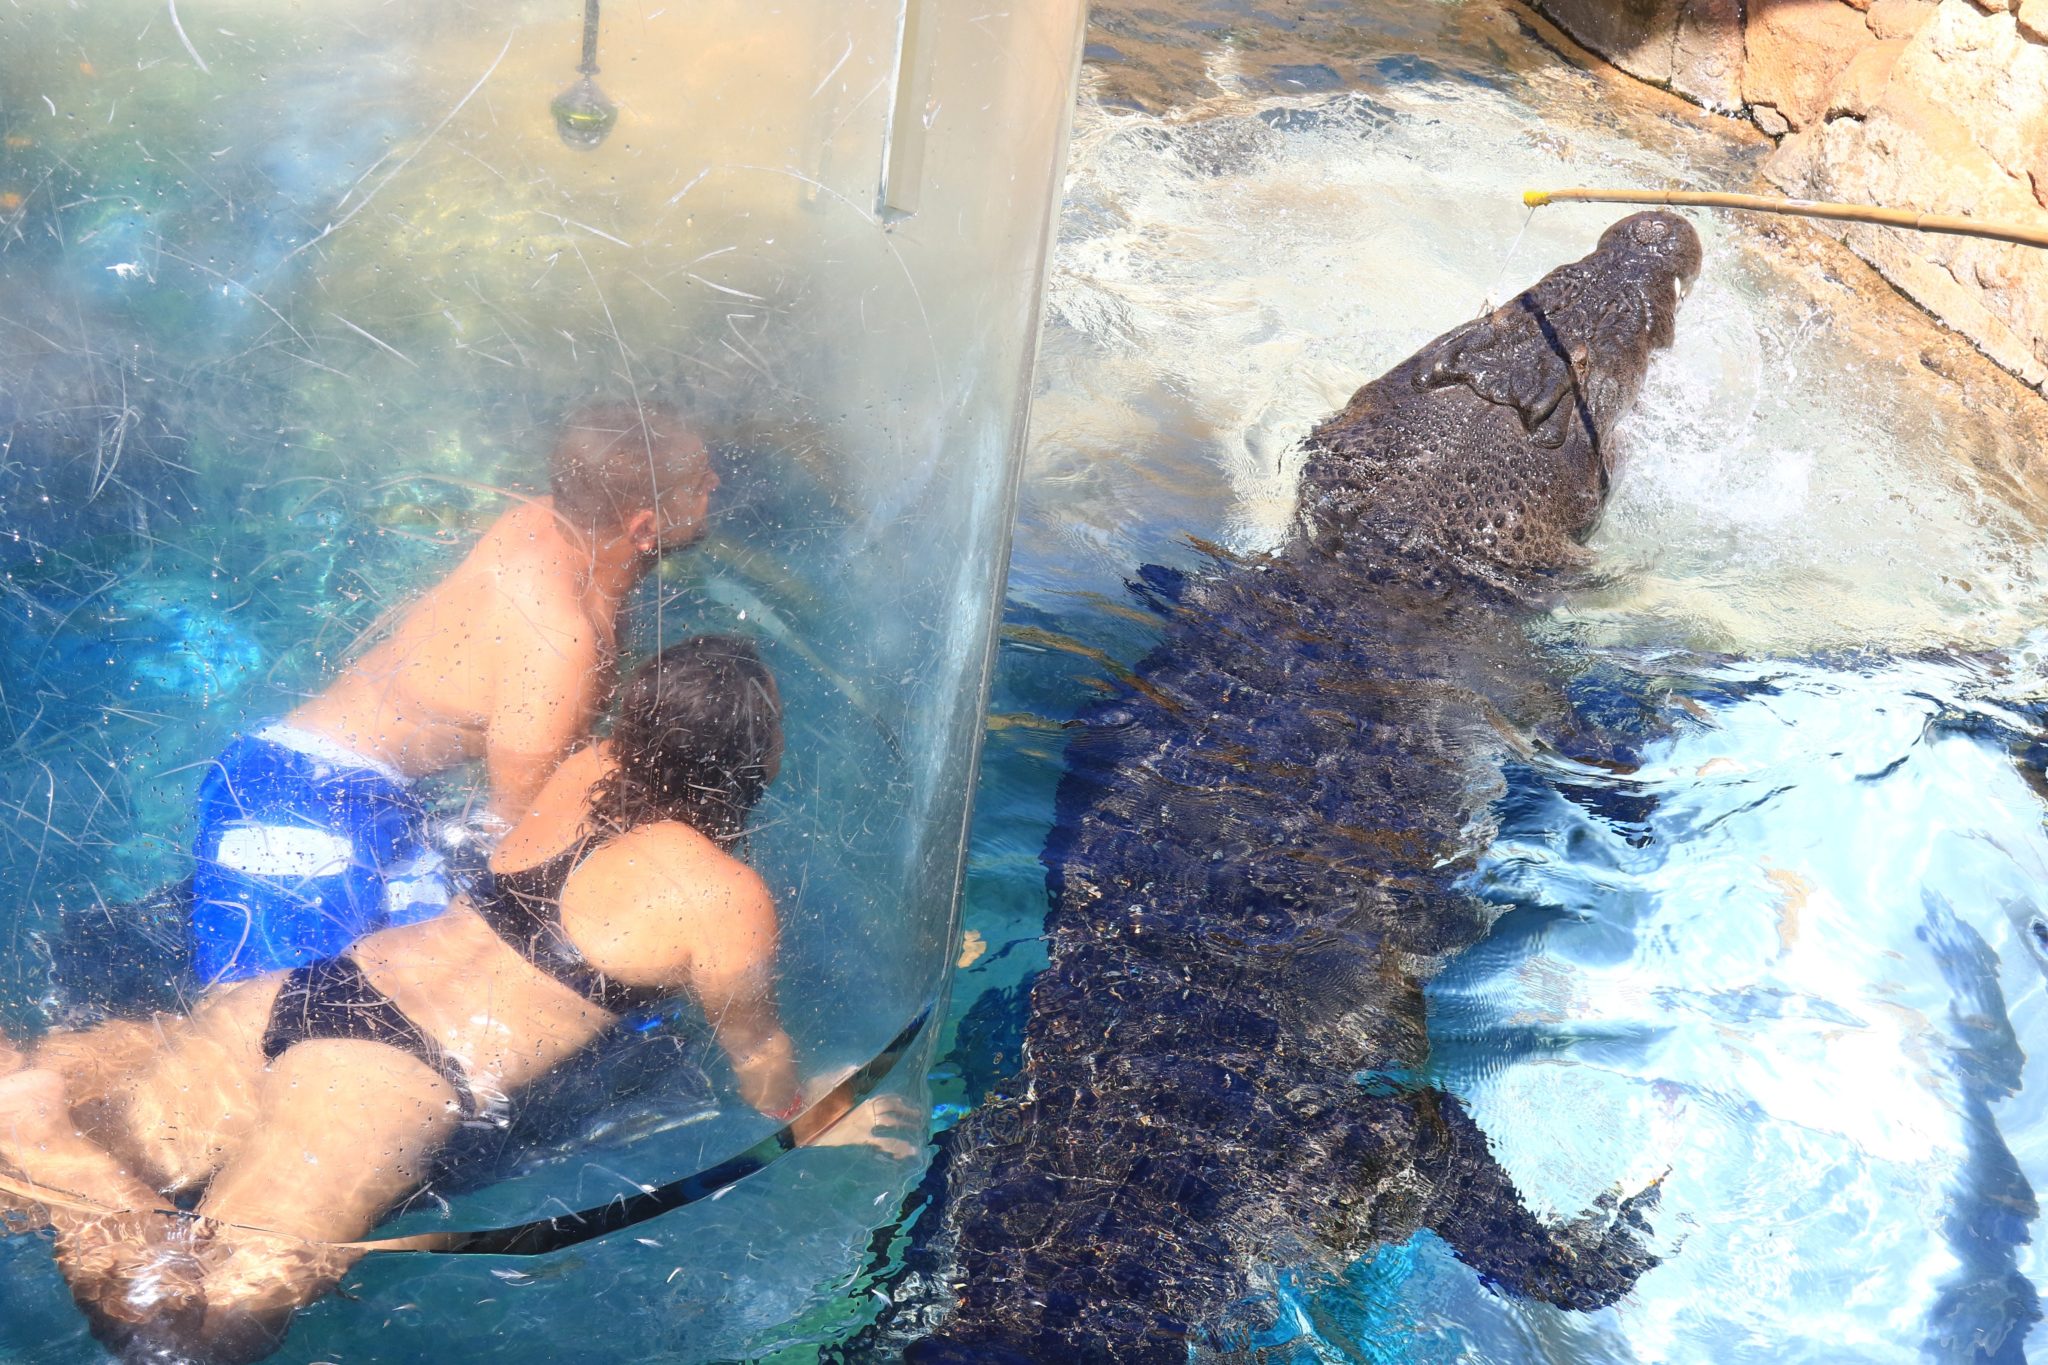 a man and woman swimming in water with an alligator